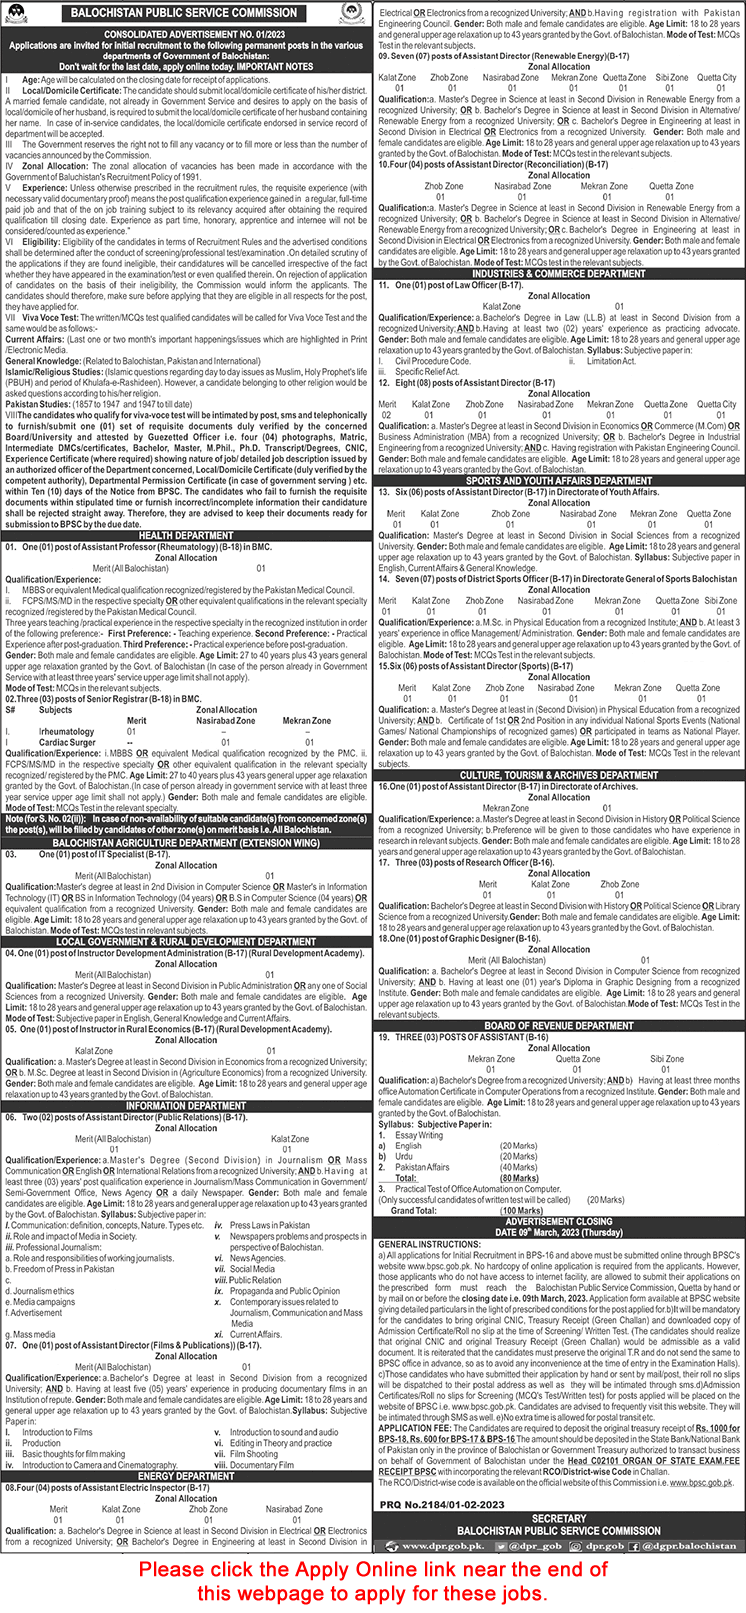 BPSC Jobs 2023 February Online Apply Consolidated Advertisement No 01/2023 Latest